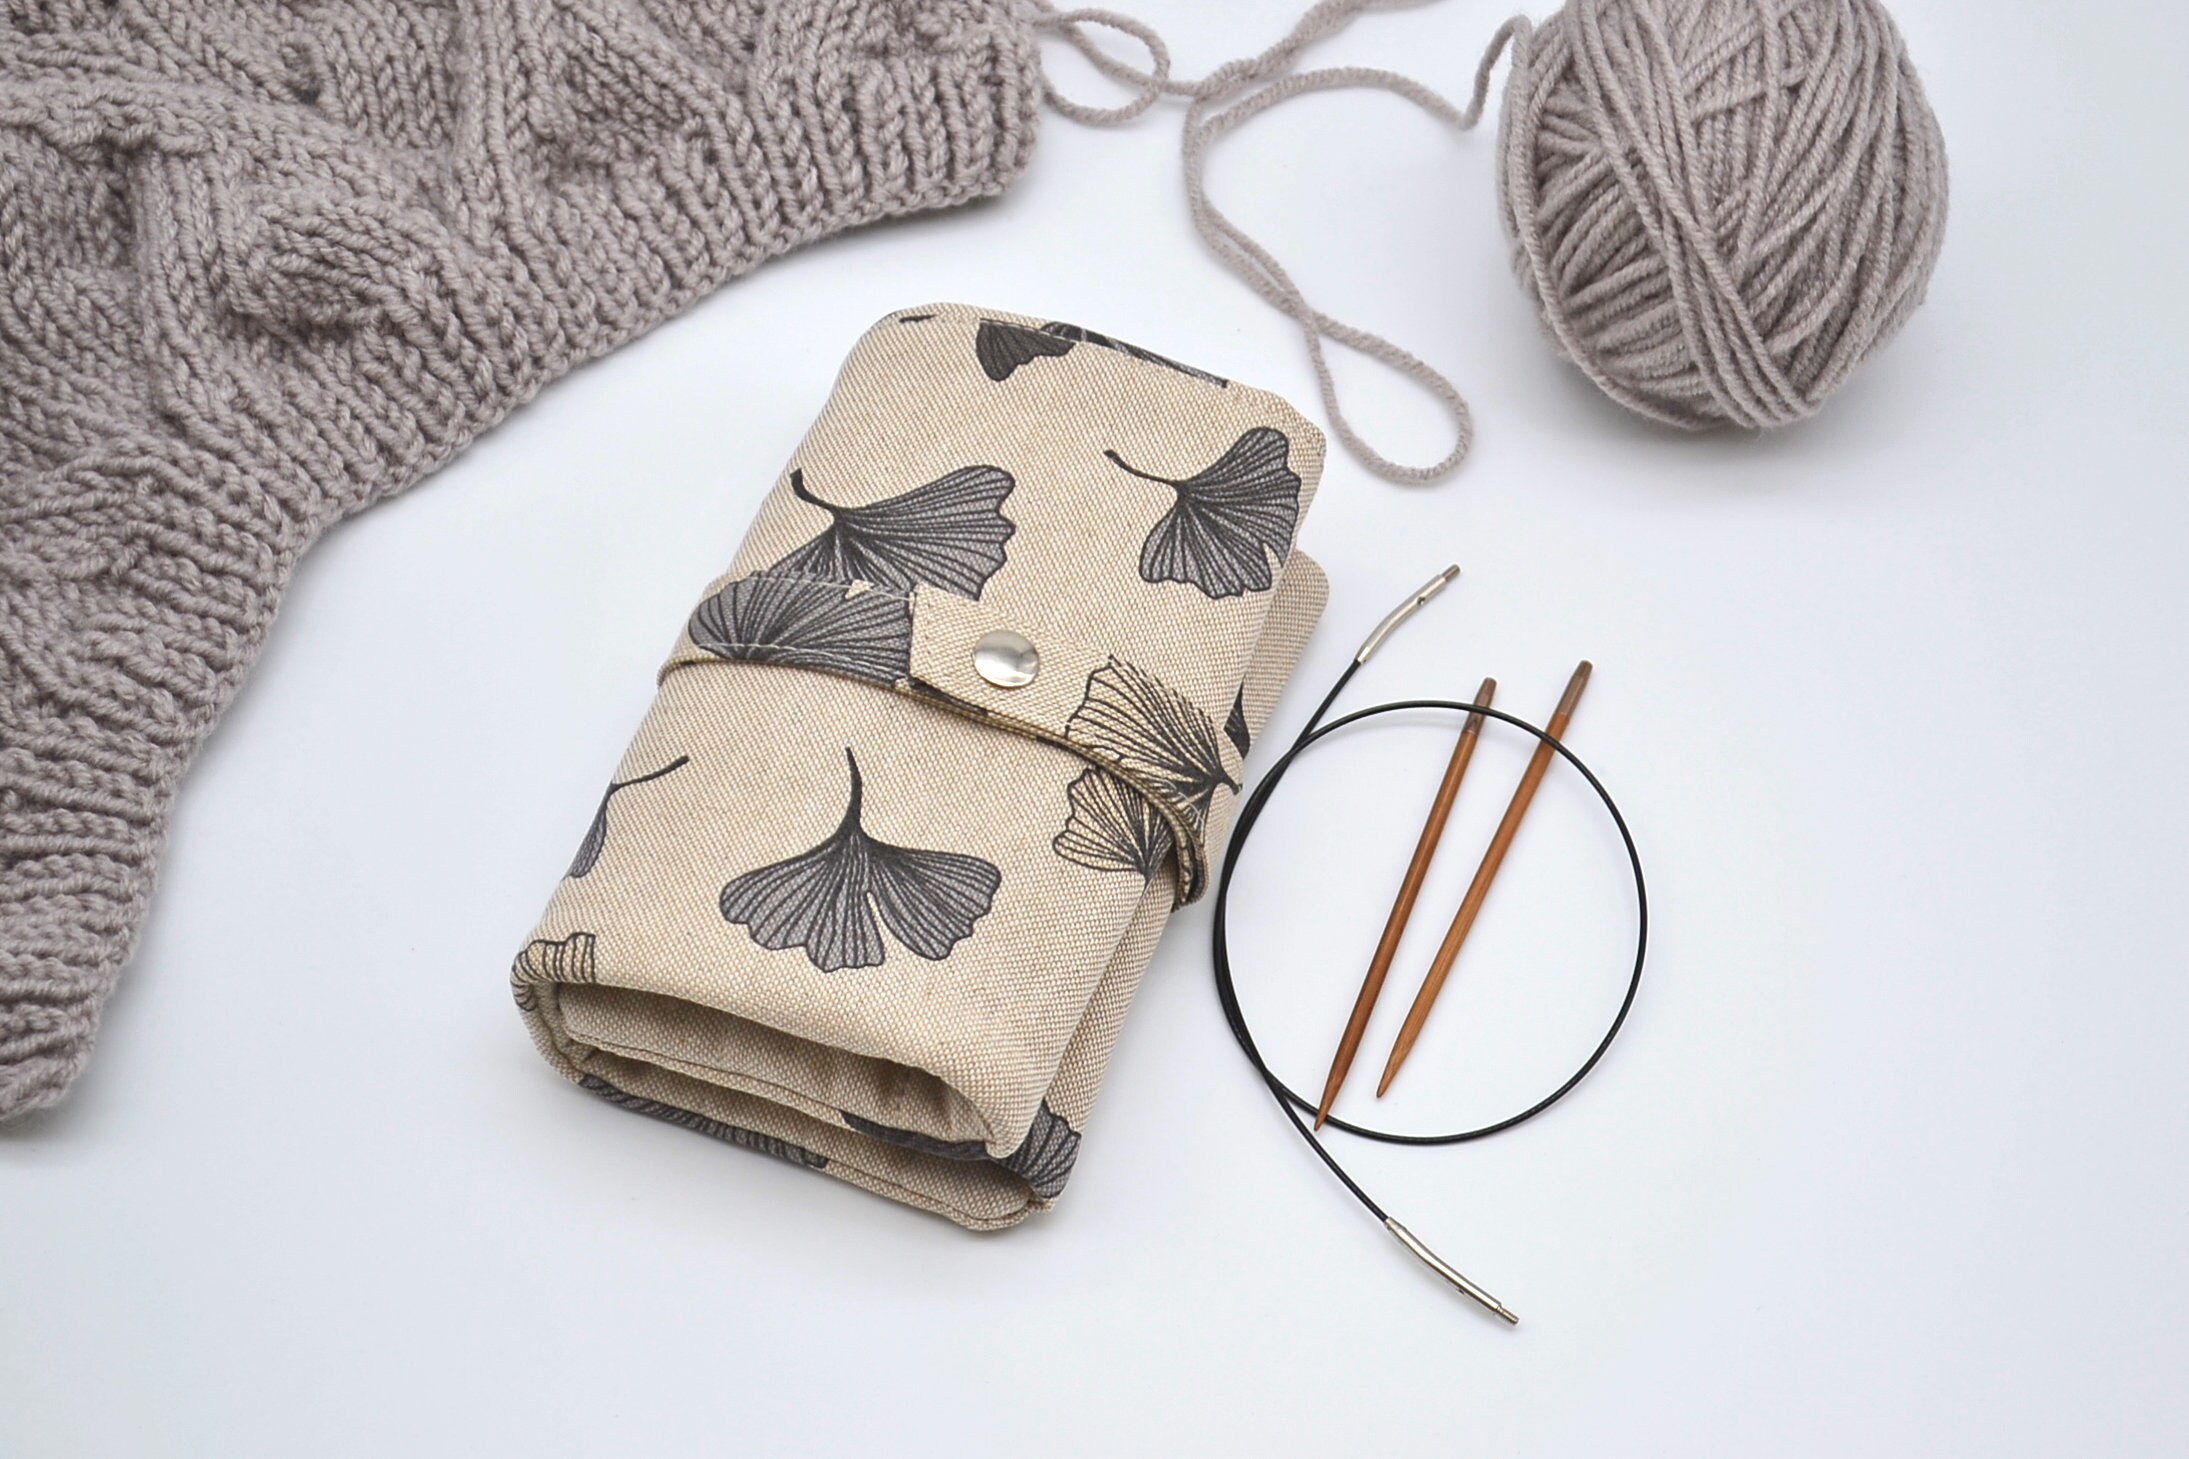 Sewing Needle Case Grand Mother Christmas Gift Leather Needle Organizer  Case Knitting Briefcase Crochet Needle Case 